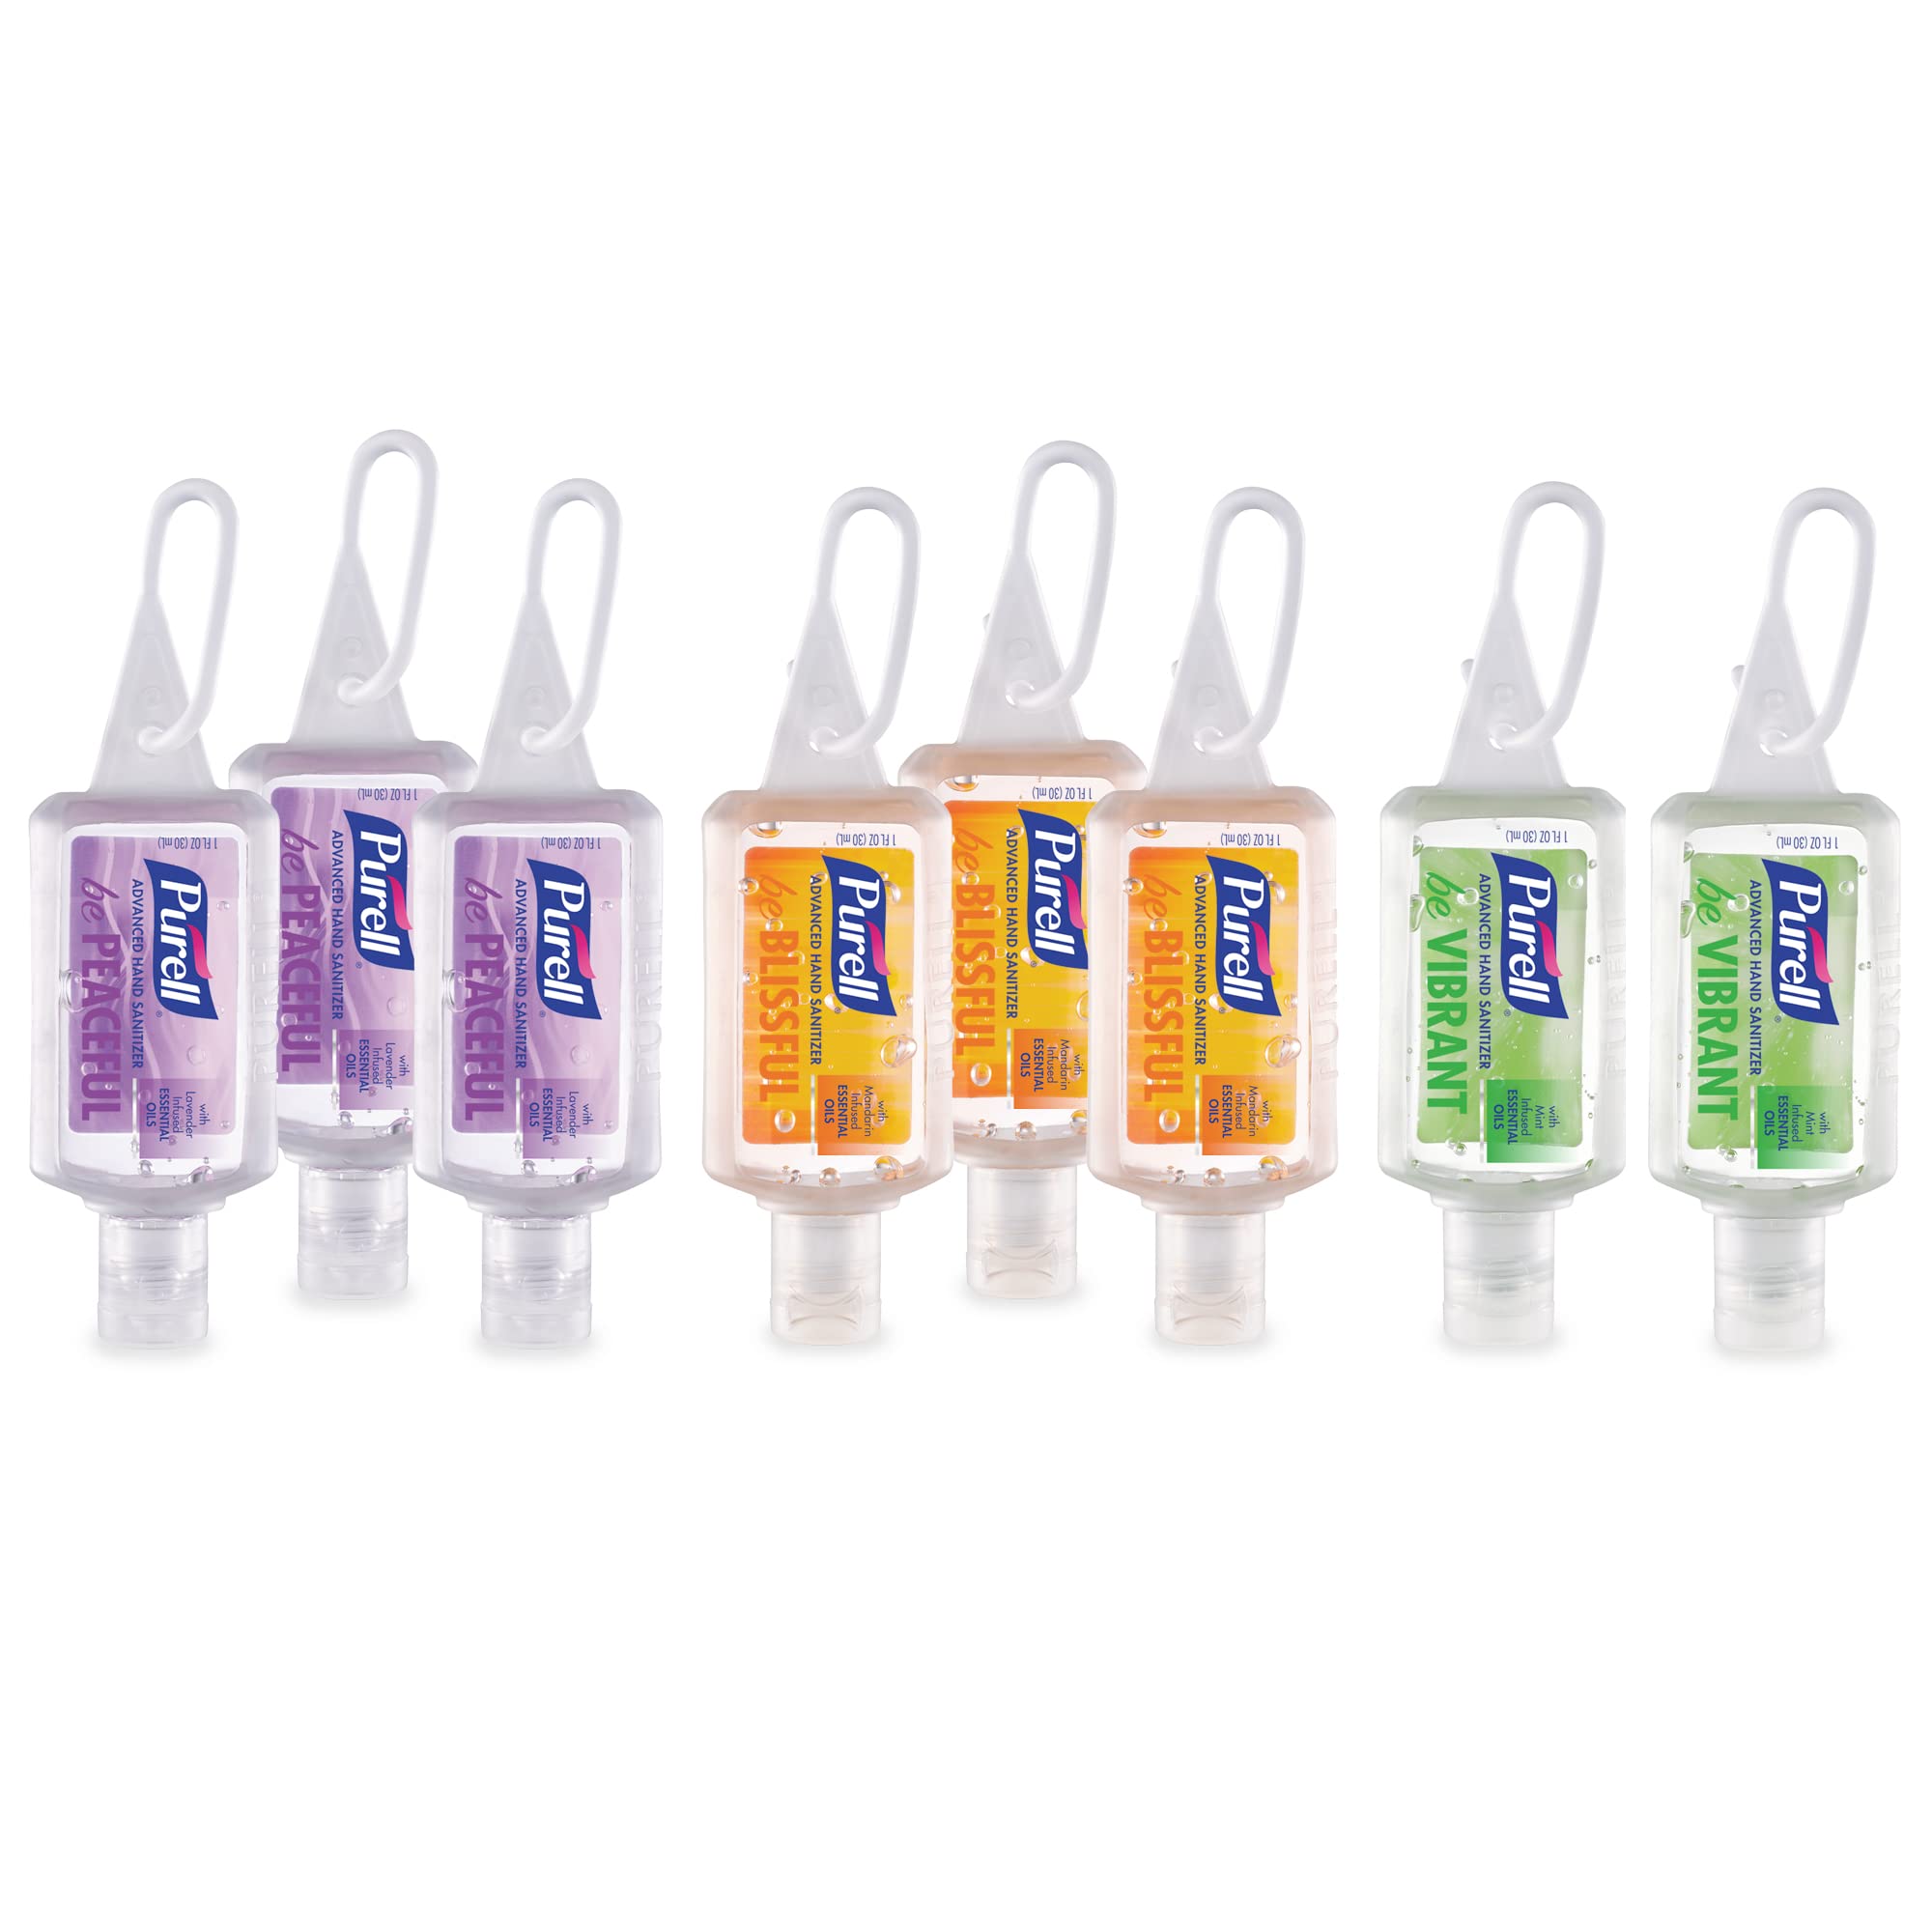 Purell Advanced Hand Sanitizer Gel Infused with Essential Oils, Scented Variety Pack, 1 fl oz Travel Size Flip Cap Bottles with JELLY WRAP Carrier (Pack of 8), 3900-09-ECME17